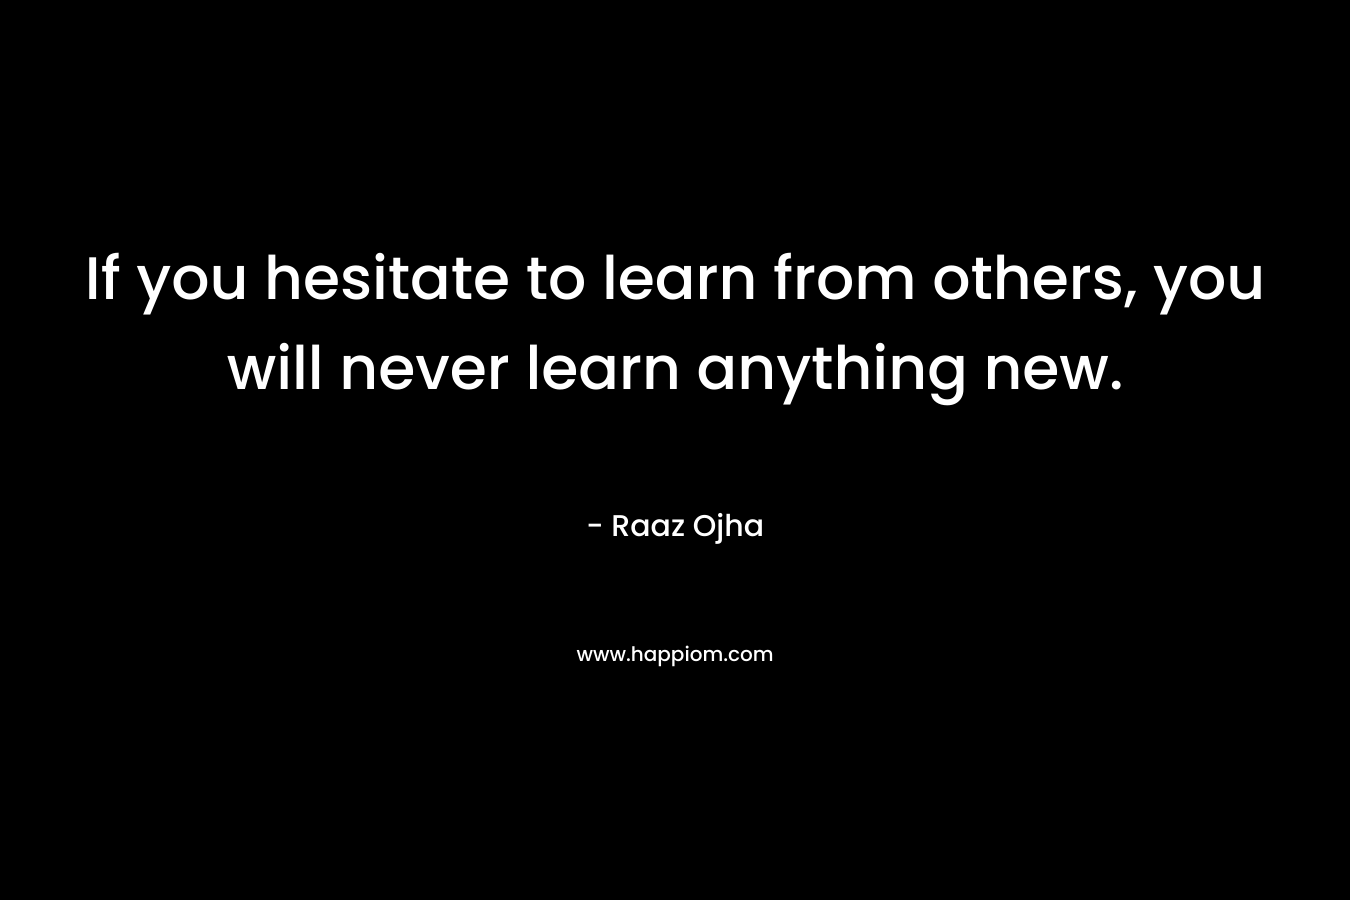 If you hesitate to learn from others, you will never learn anything new.